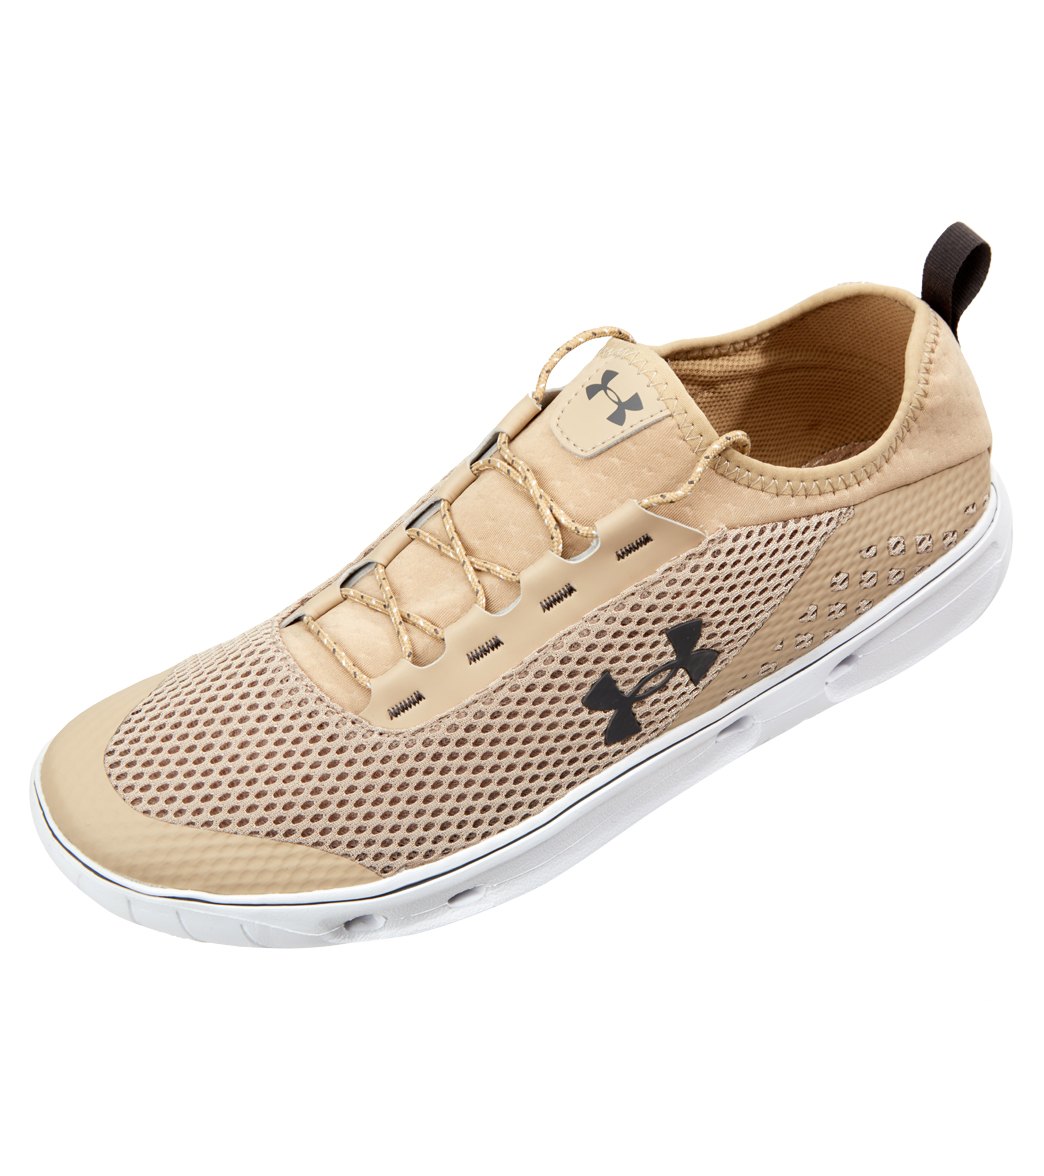 Cheap under armour water shoes mens Buy 